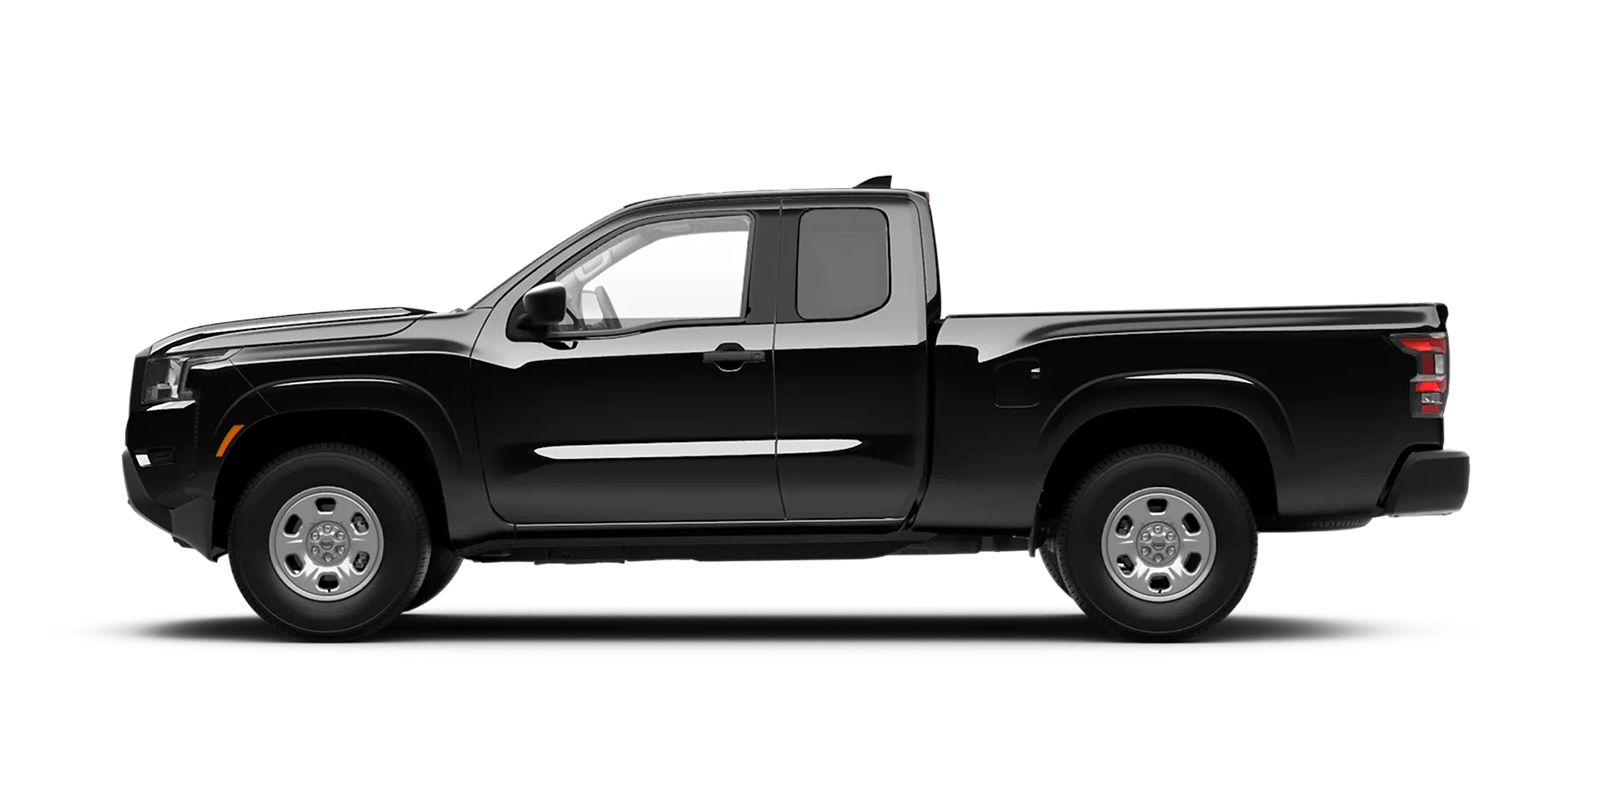 2022 Frontier King Cab S 4x2 in Super Black | Wallace Nissan of Kingsport in Kingsport TN